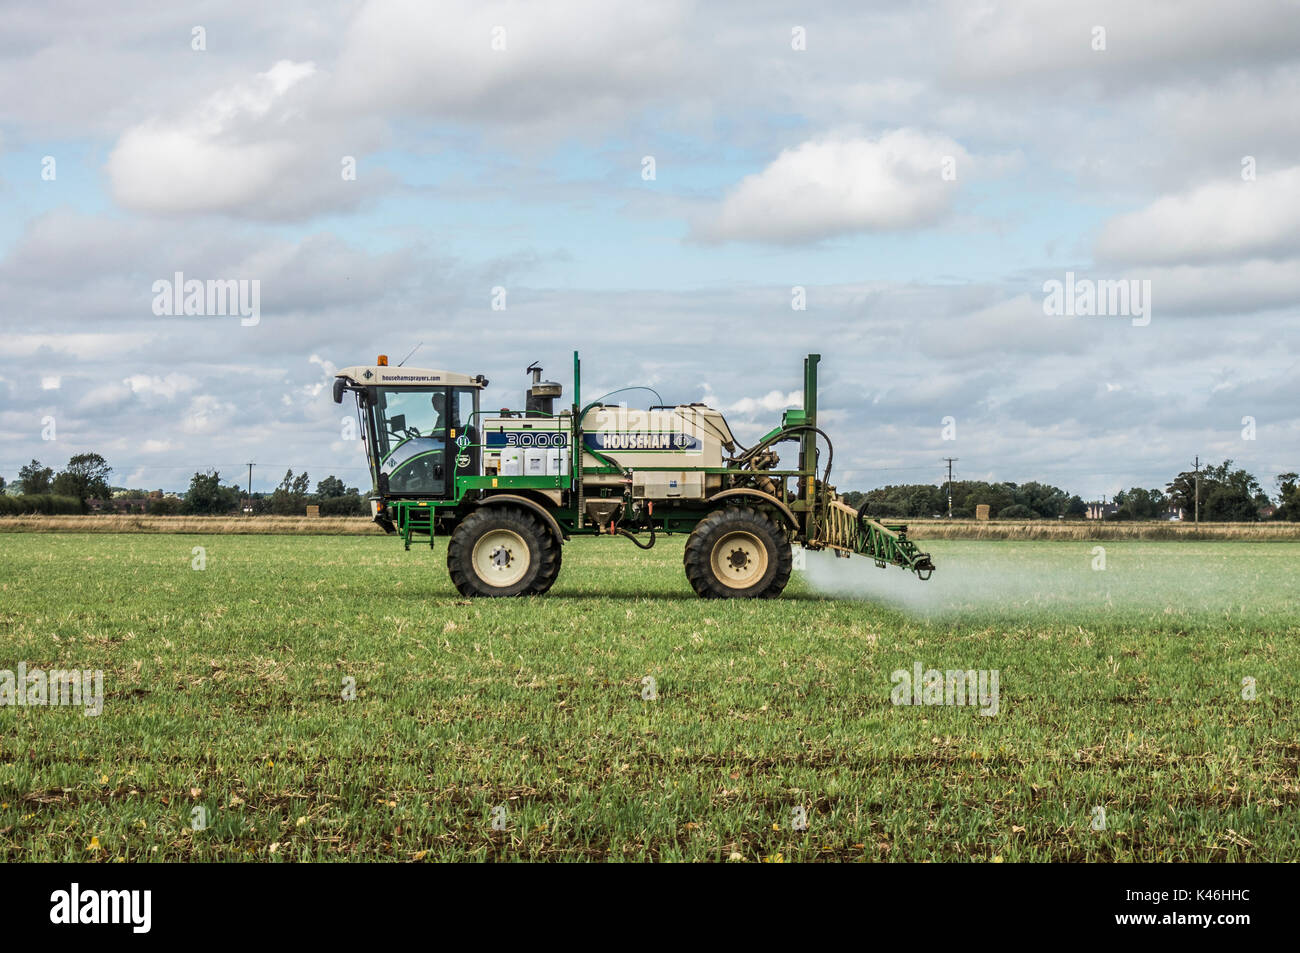 Man driving a Househam 300 crop sprayer in a recently harvested field, in the early autumn. Langtoft, Lincolnshire, England, UK. Stock Photo